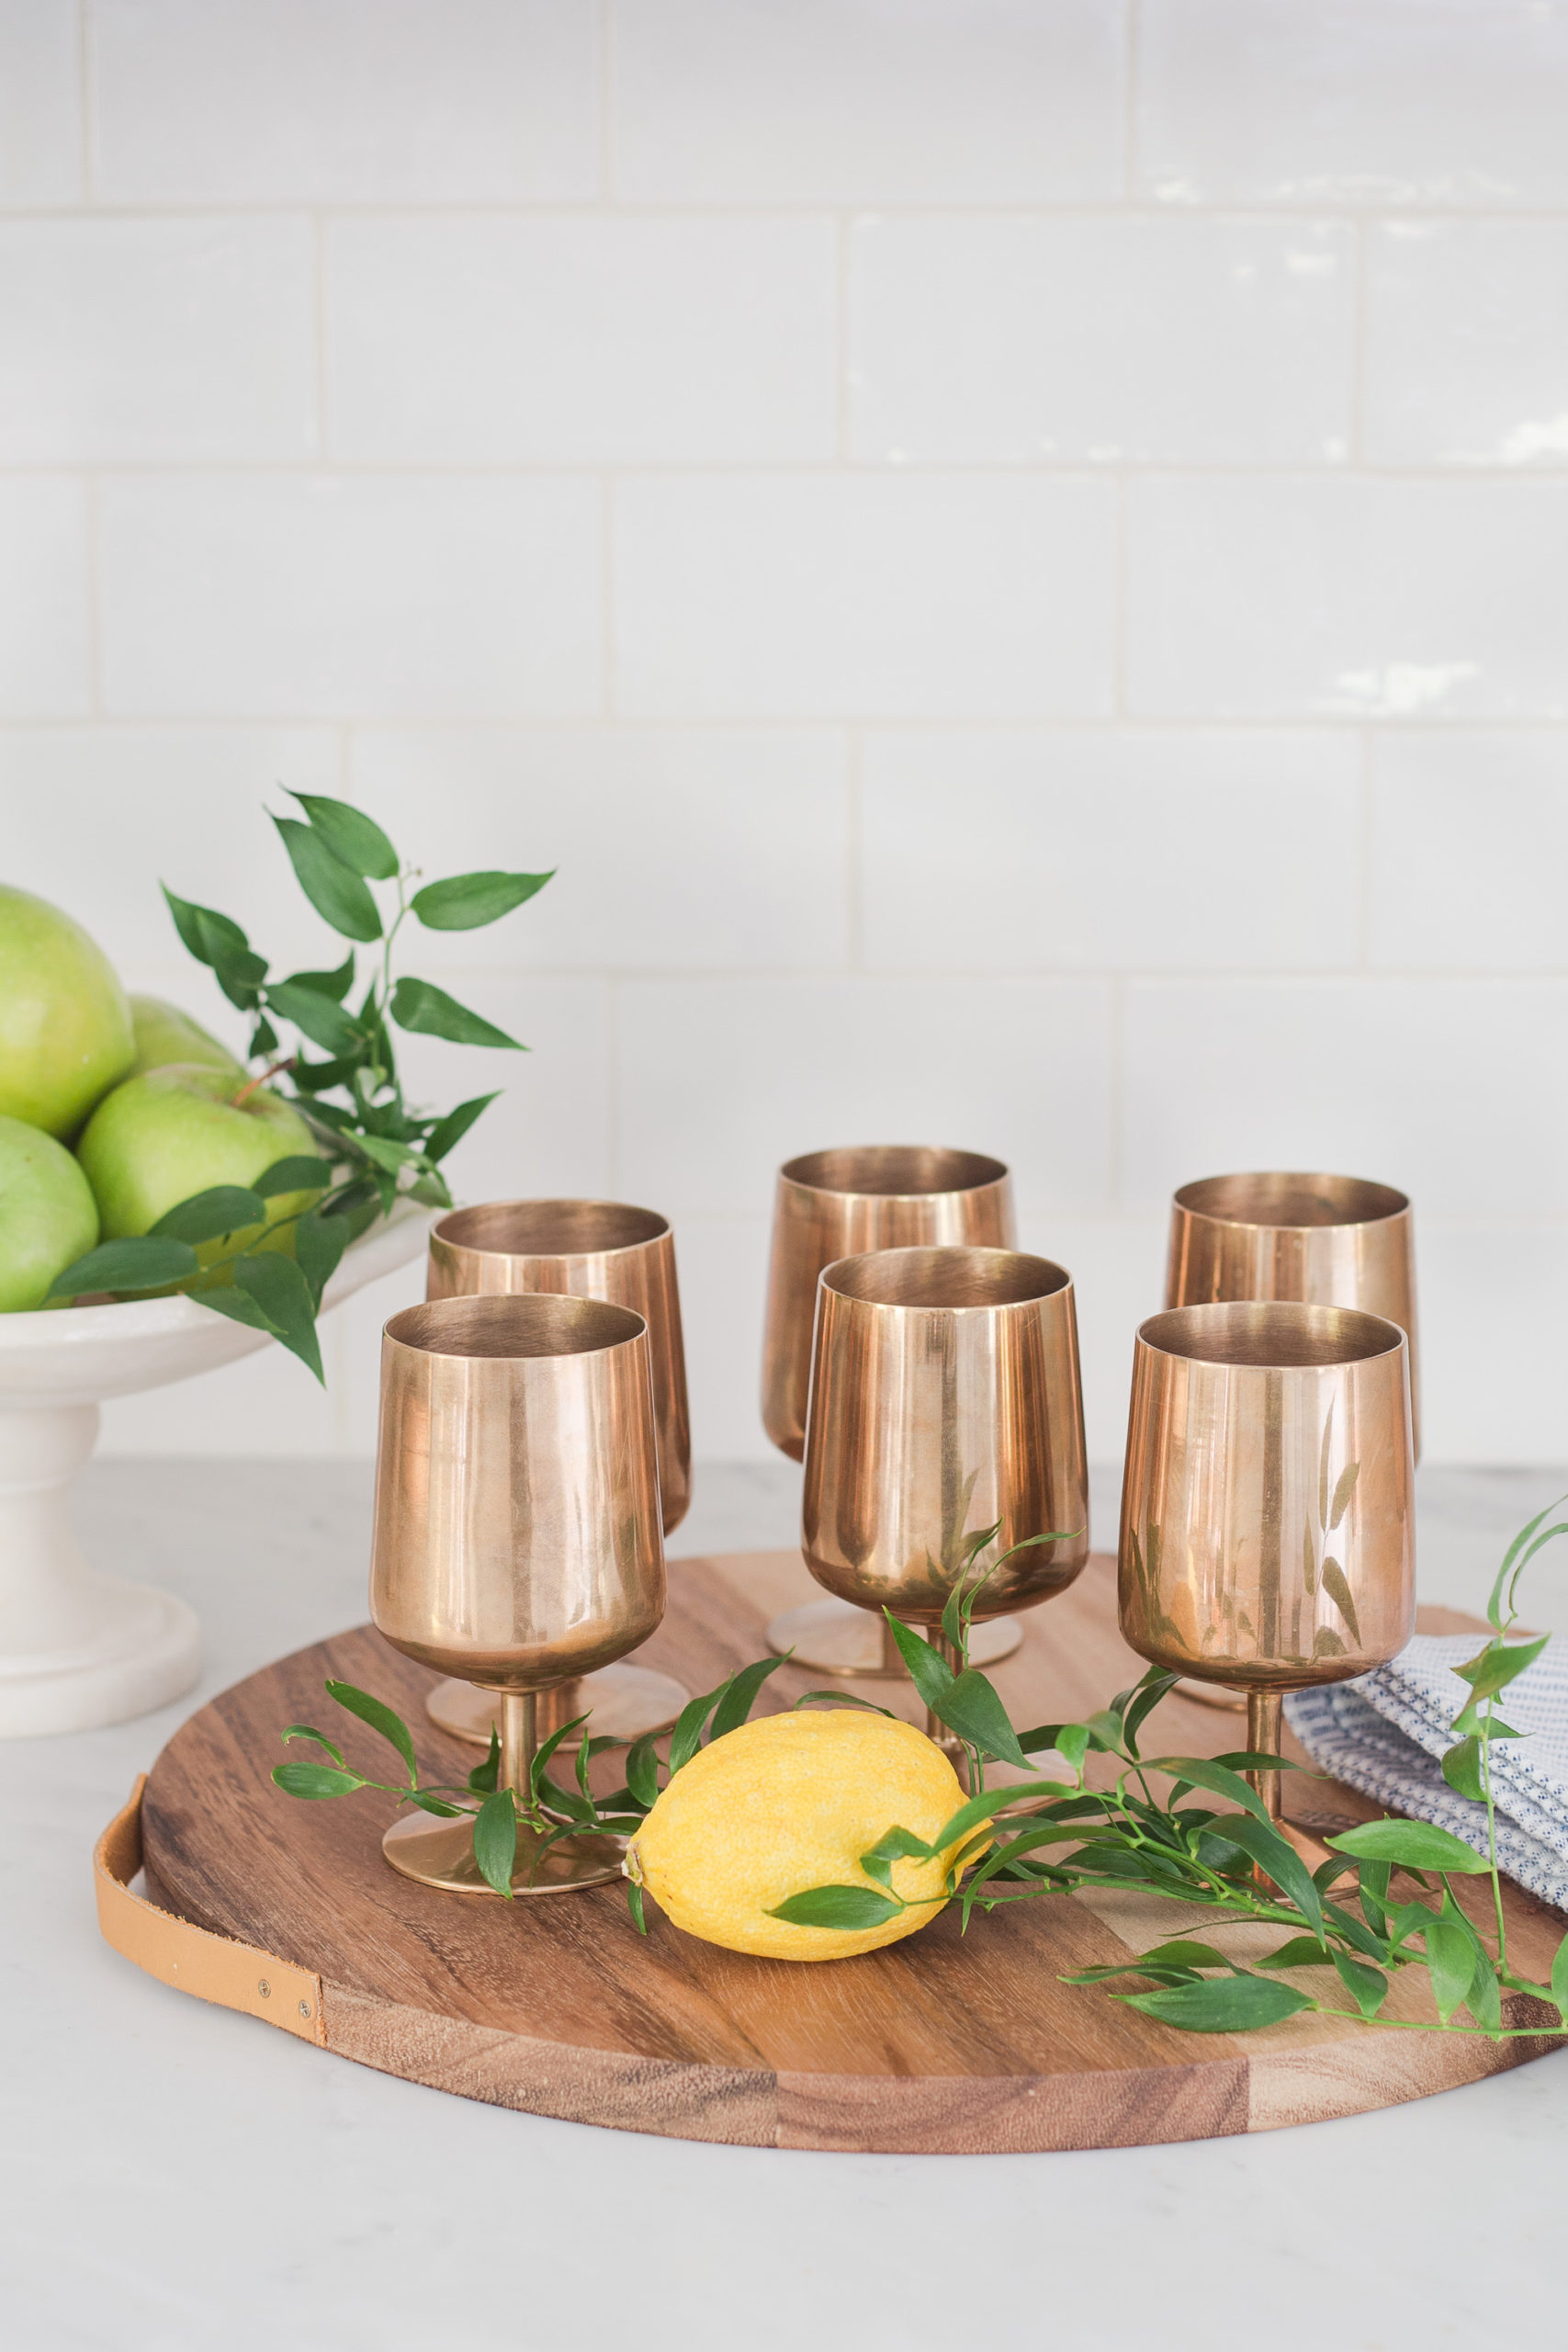 round wood tray with 6 copper goblets, lemon and greenery